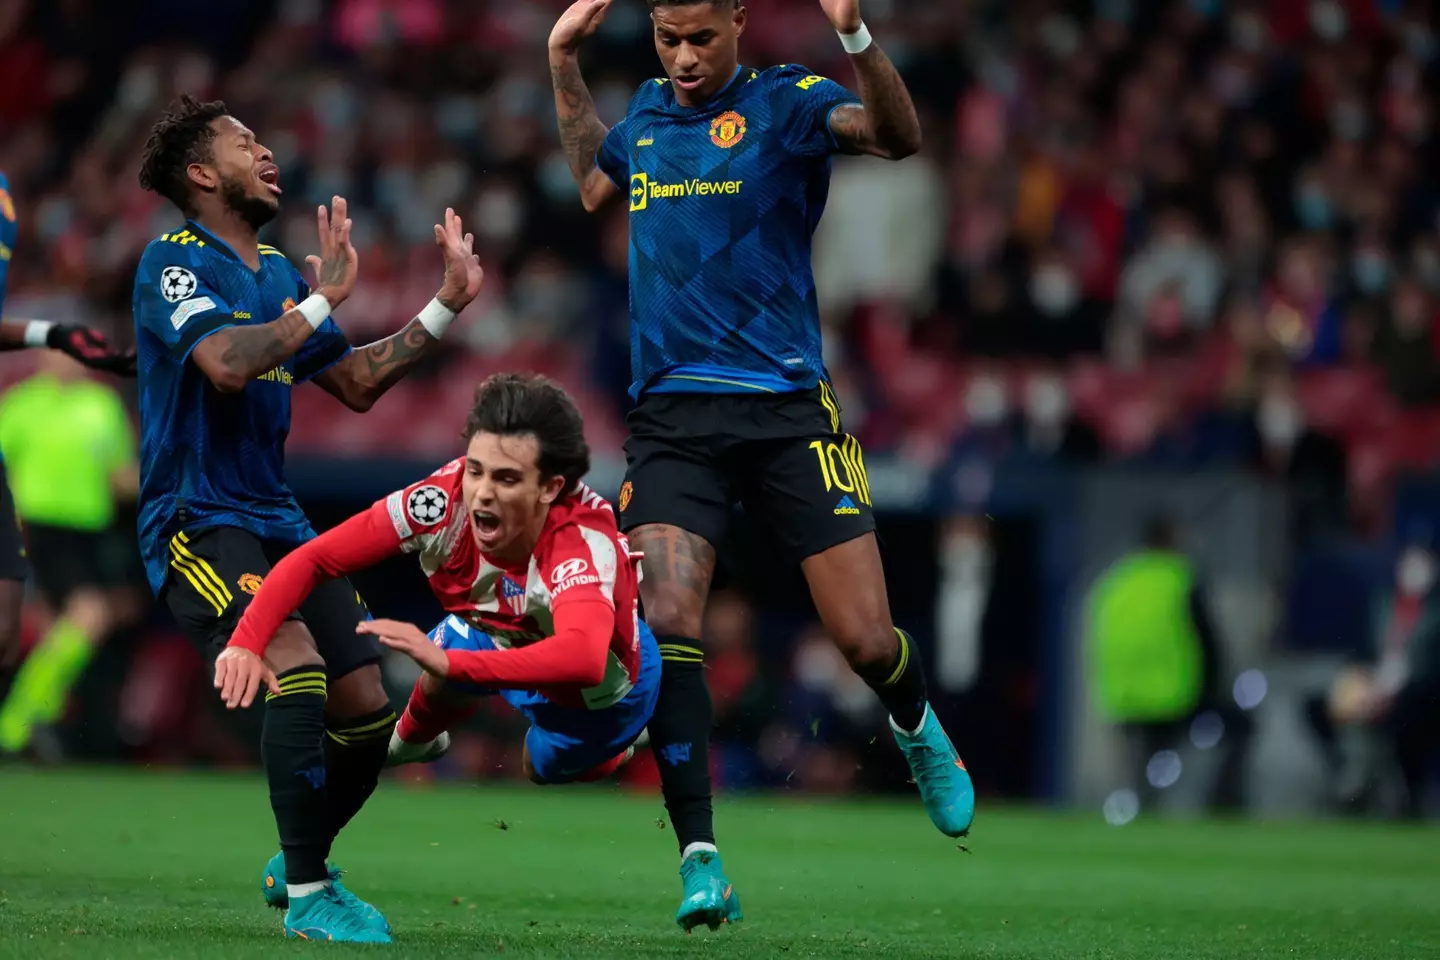 United were knocked out in the Champions League by Atletico Madrid. Image